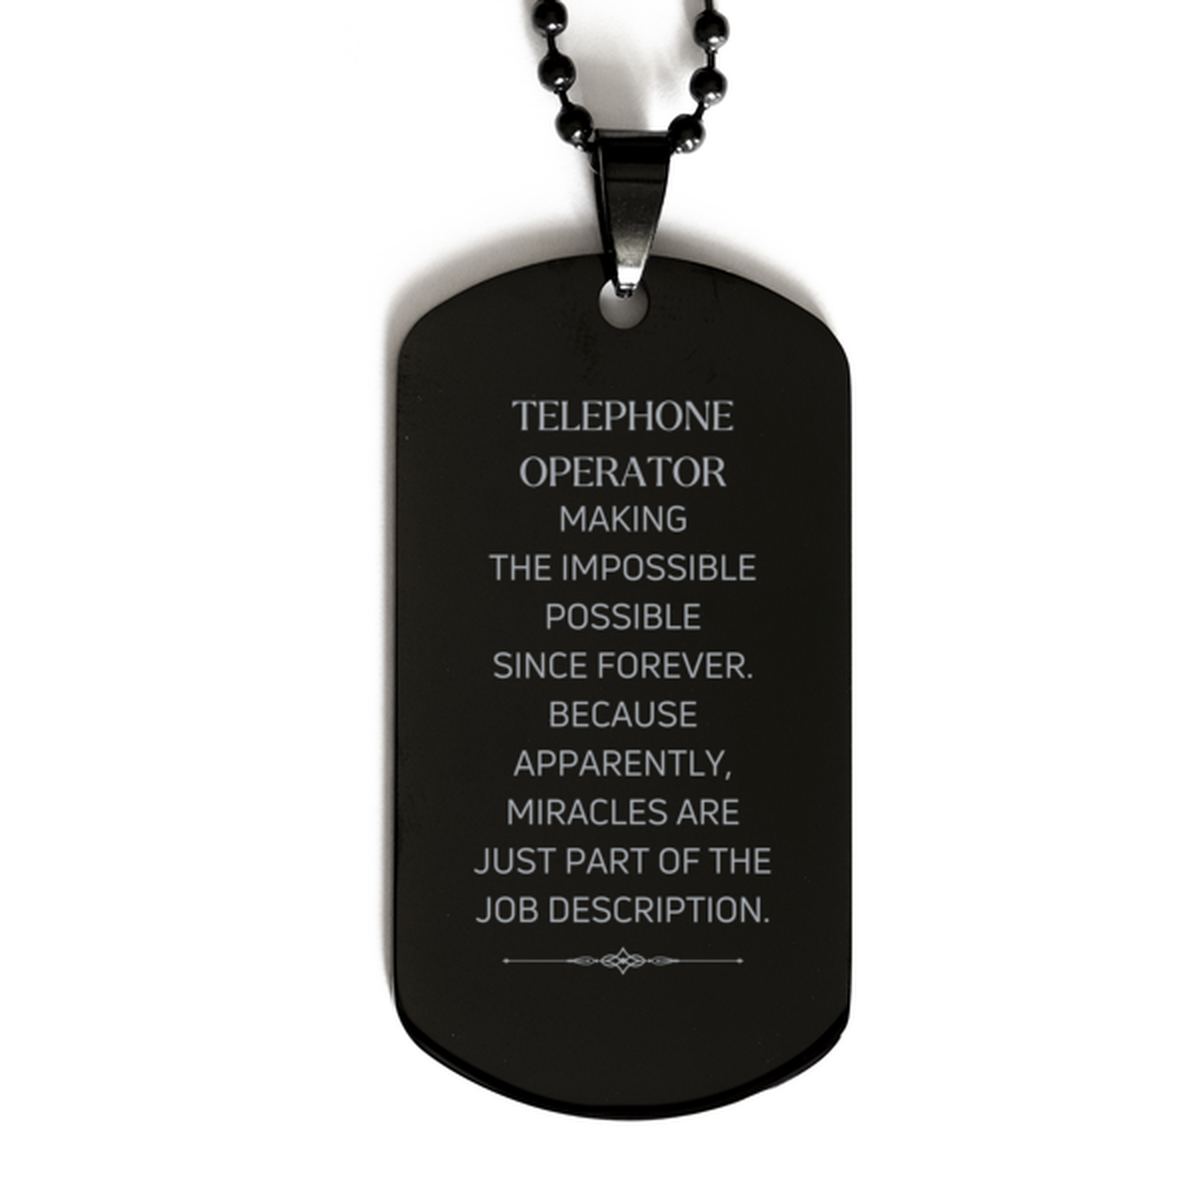 Funny Telephone Operator Gifts, Miracles are just part of the job description, Inspirational Birthday Black Dog Tag For Telephone Operator, Men, Women, Coworkers, Friends, Boss